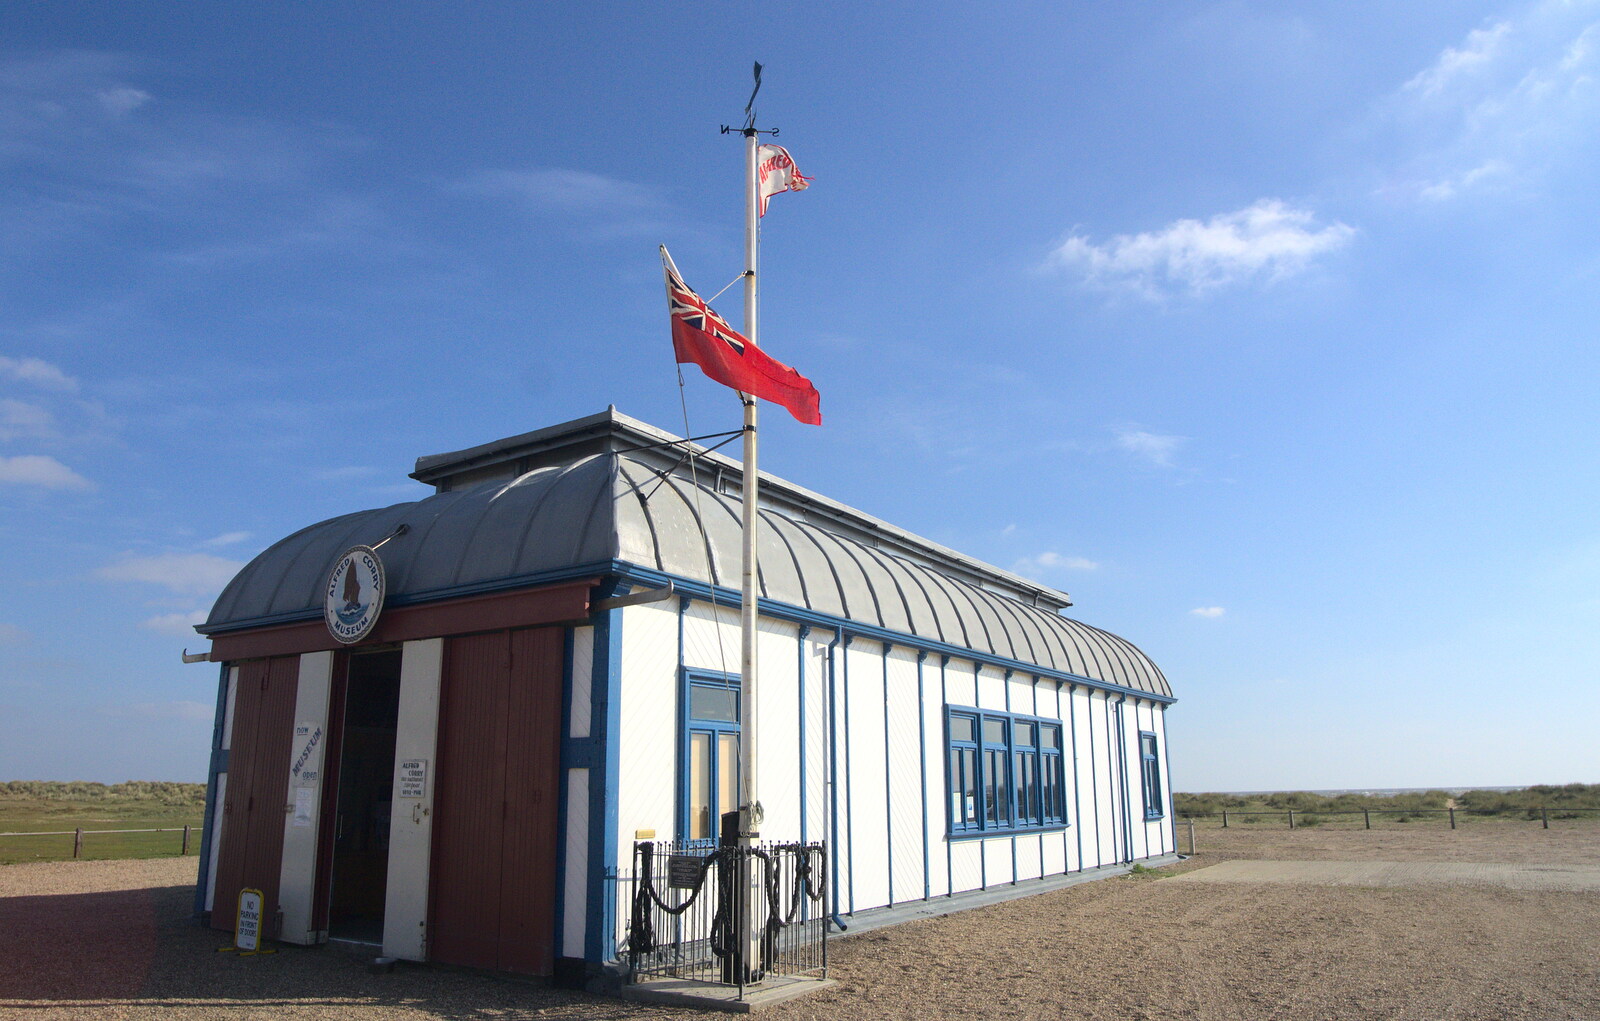 The lifeboat's building, from Cromer Pier from A DC3 Quiz and the Alfred Corry, Southwold, Suffolk, - 9th October 2015